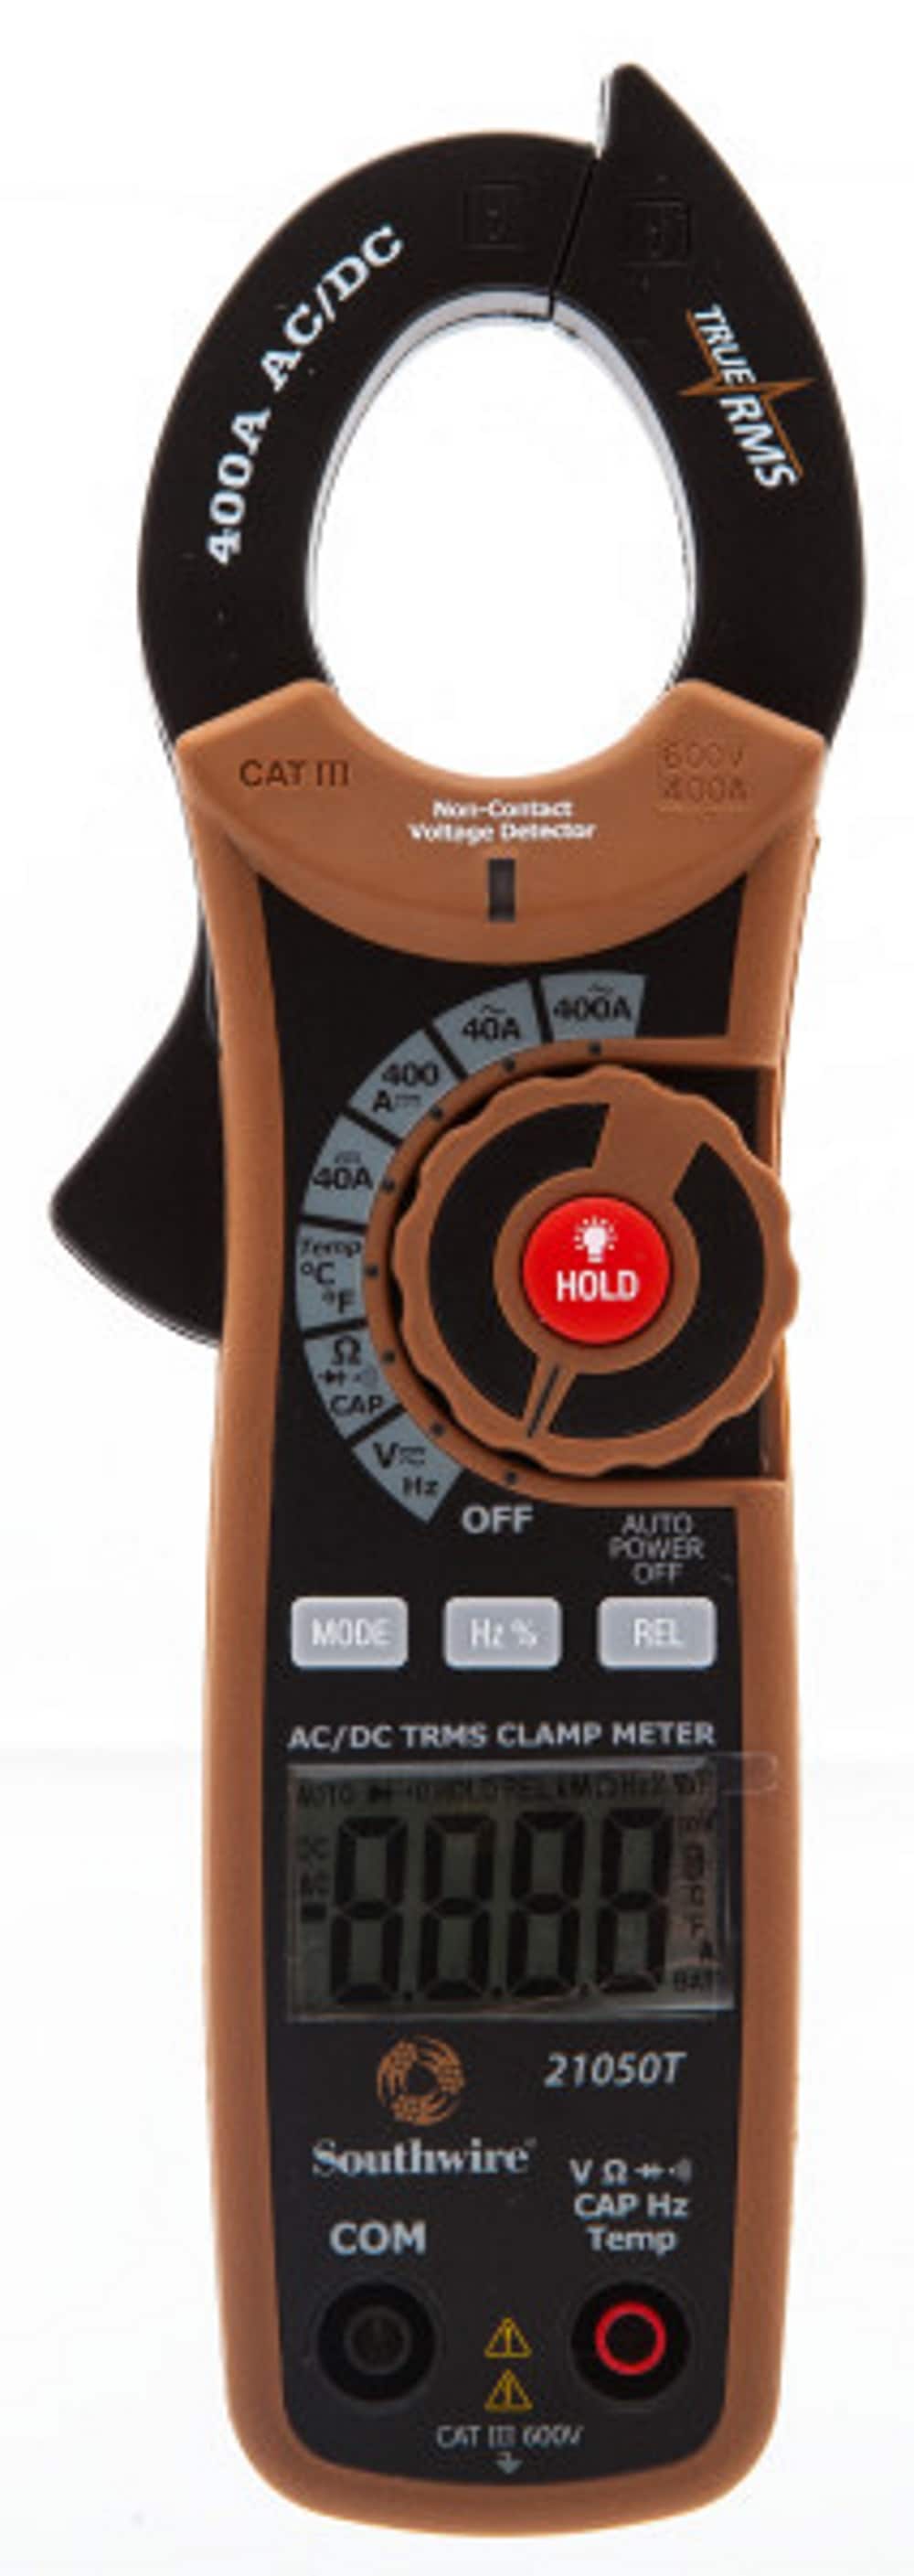 Southwire Non-contact Digital Clamp Meter Multimeter 400 Amp 600